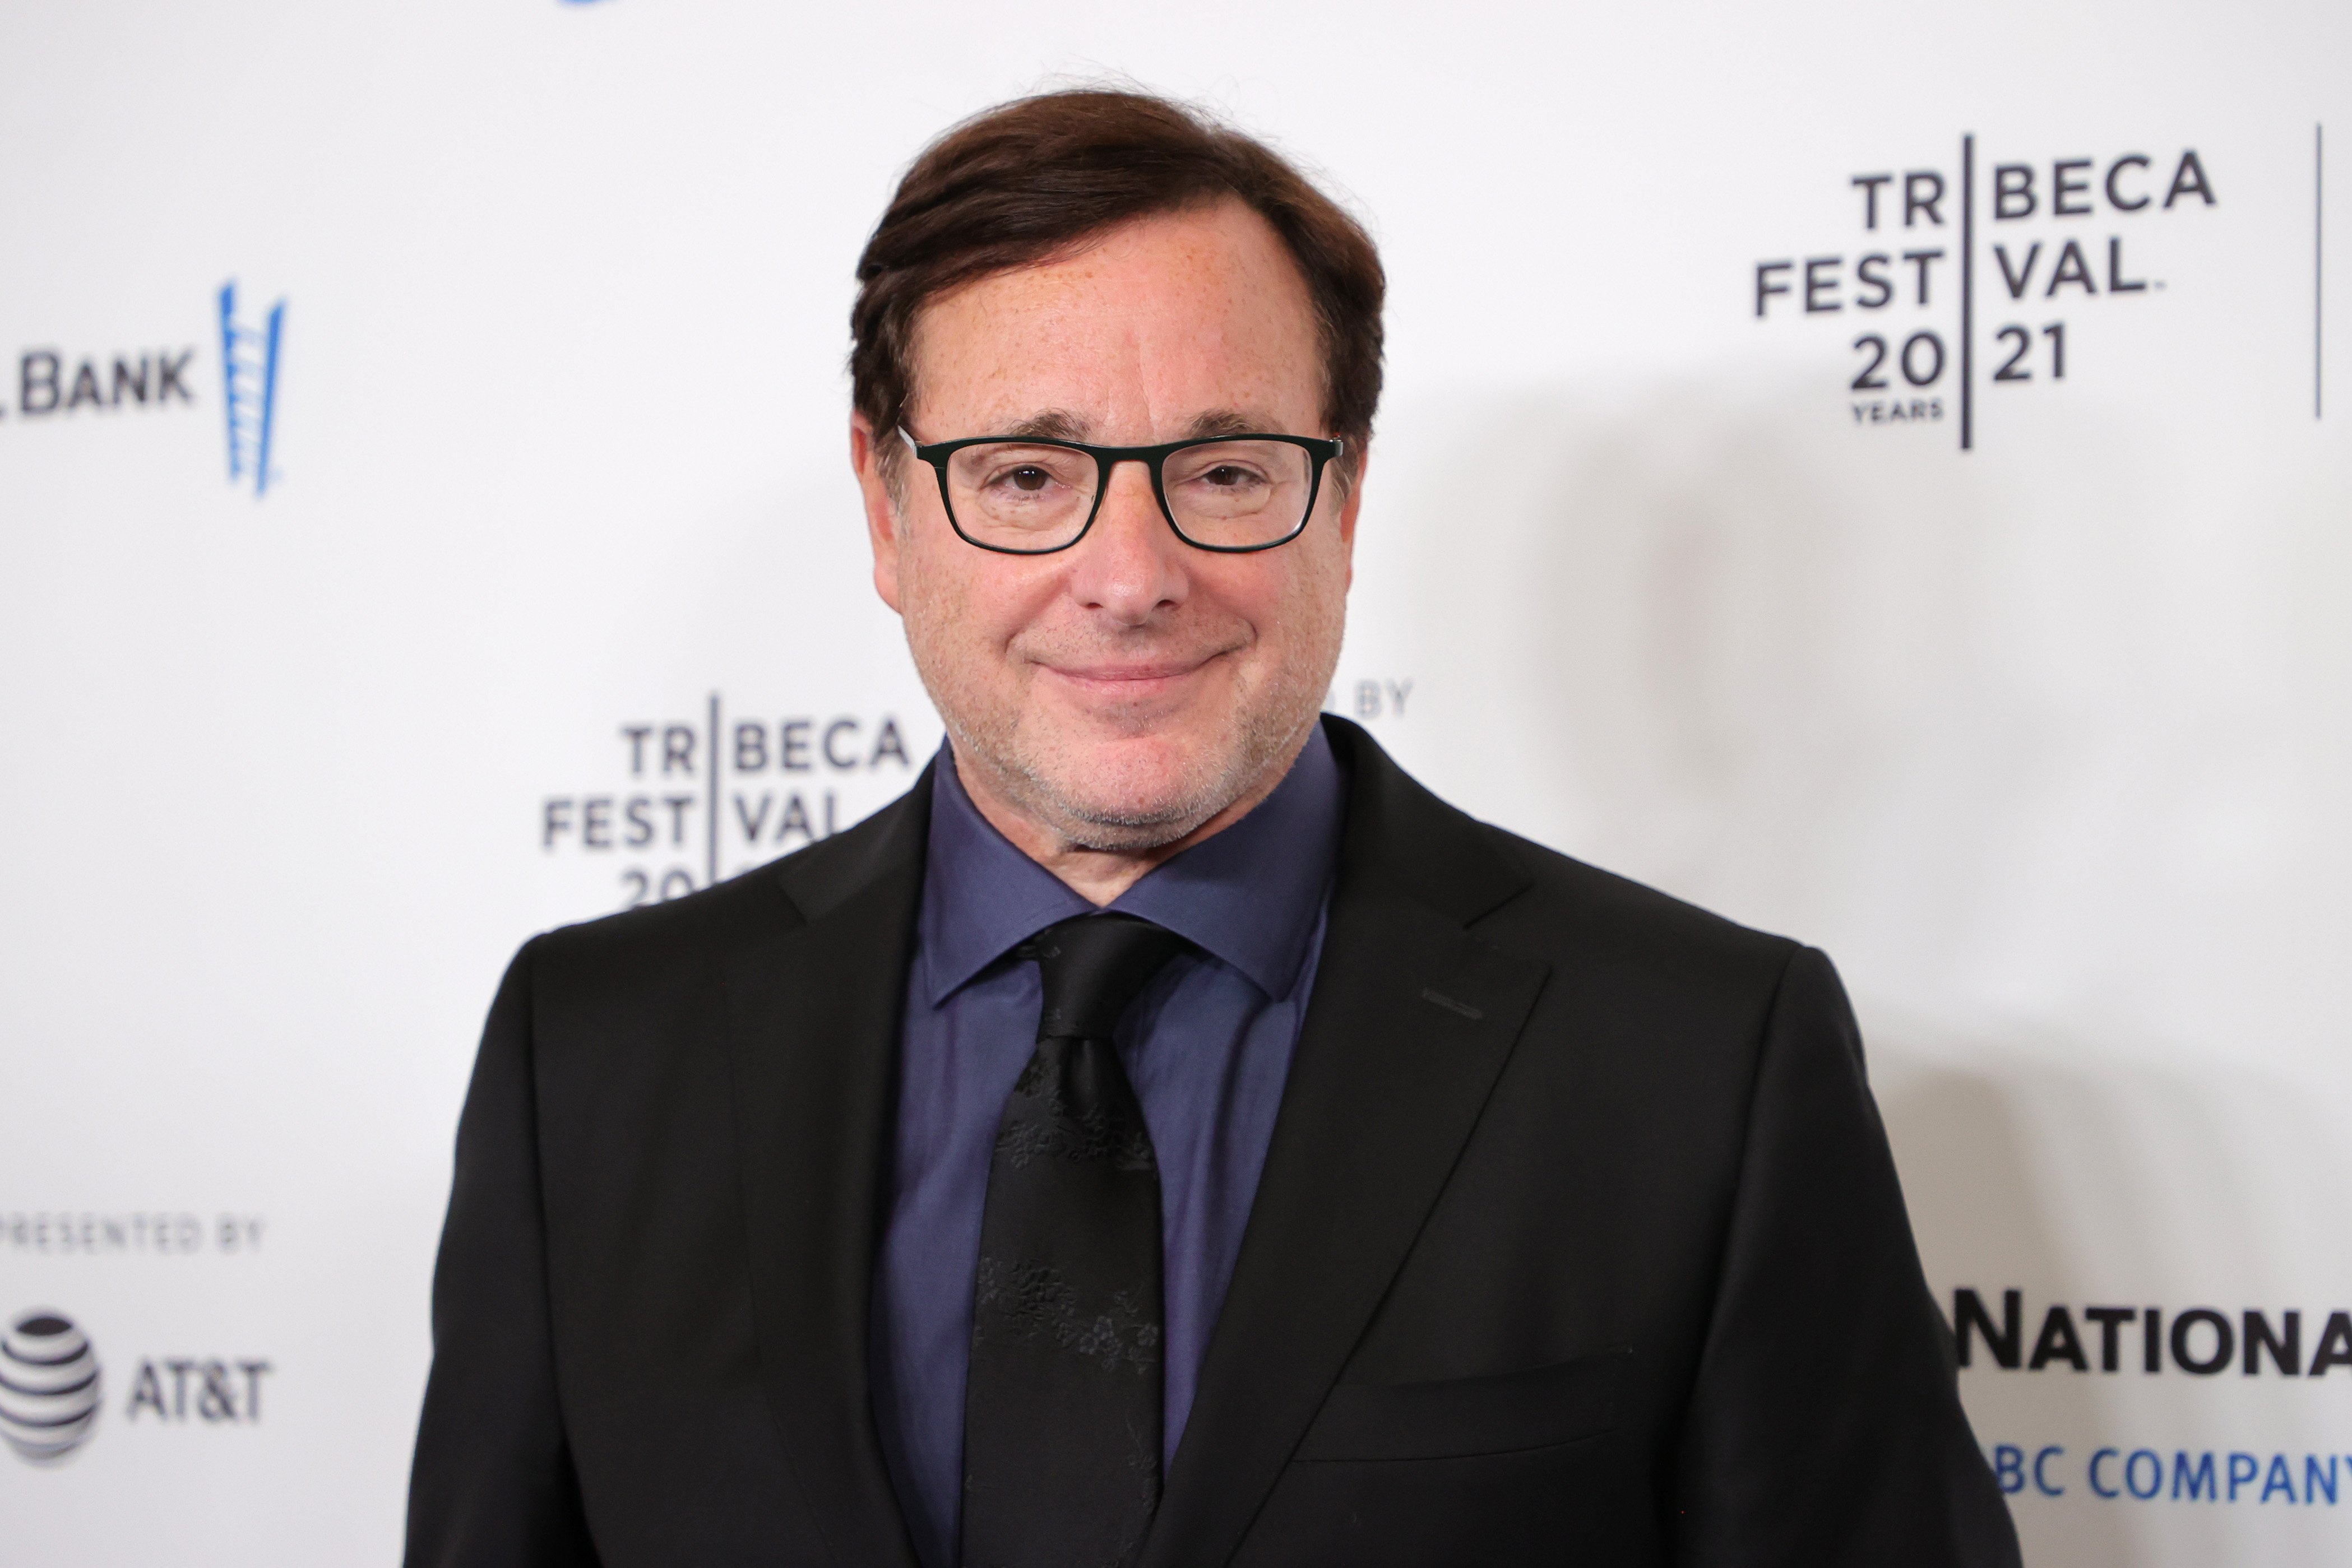 Bob Saget on the red carpet at the Untitled Dave Chappelle Documentary premiere